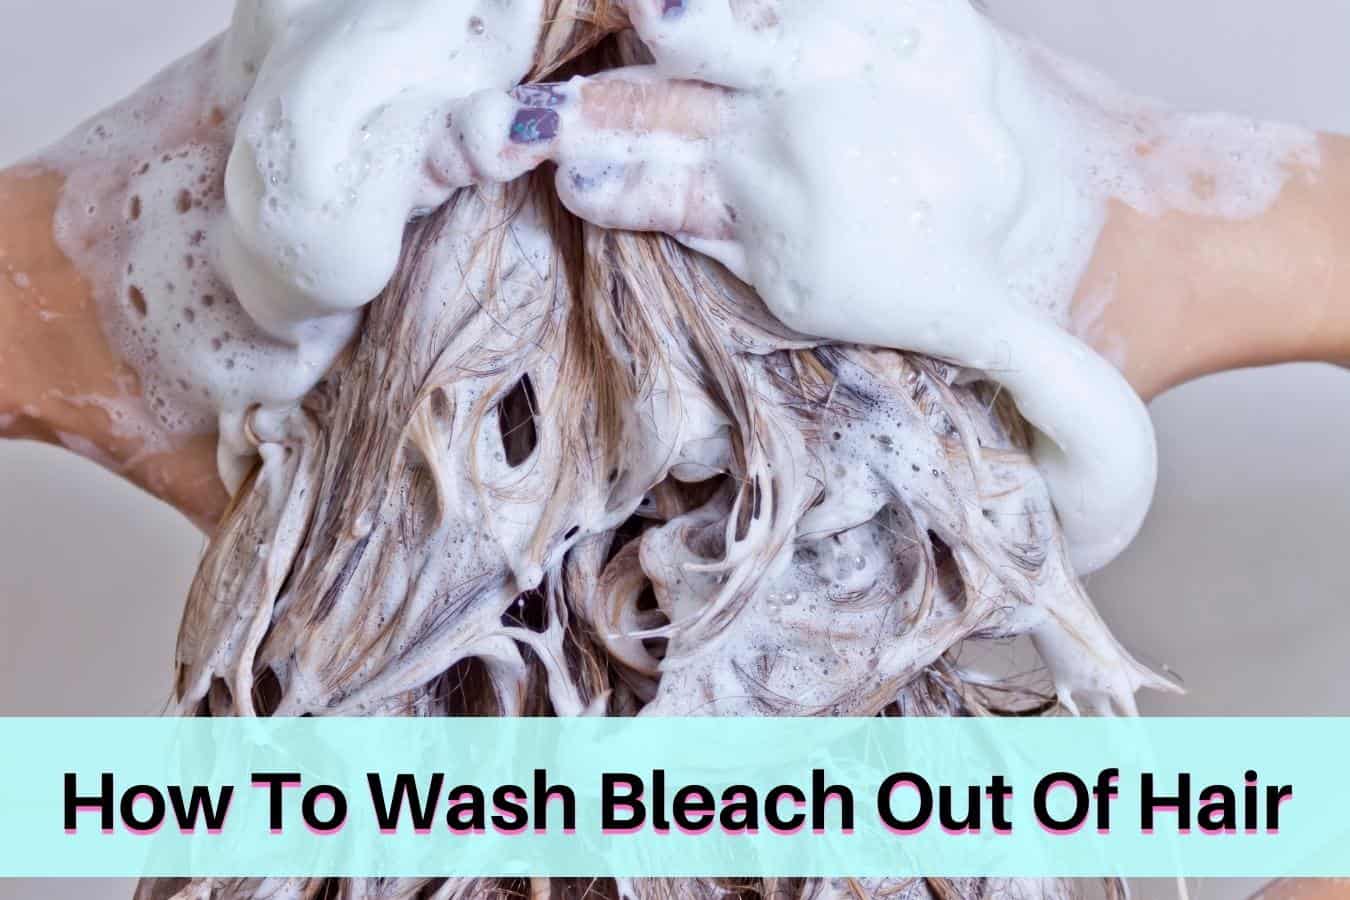 How To Wash Bleach Out Of Hair